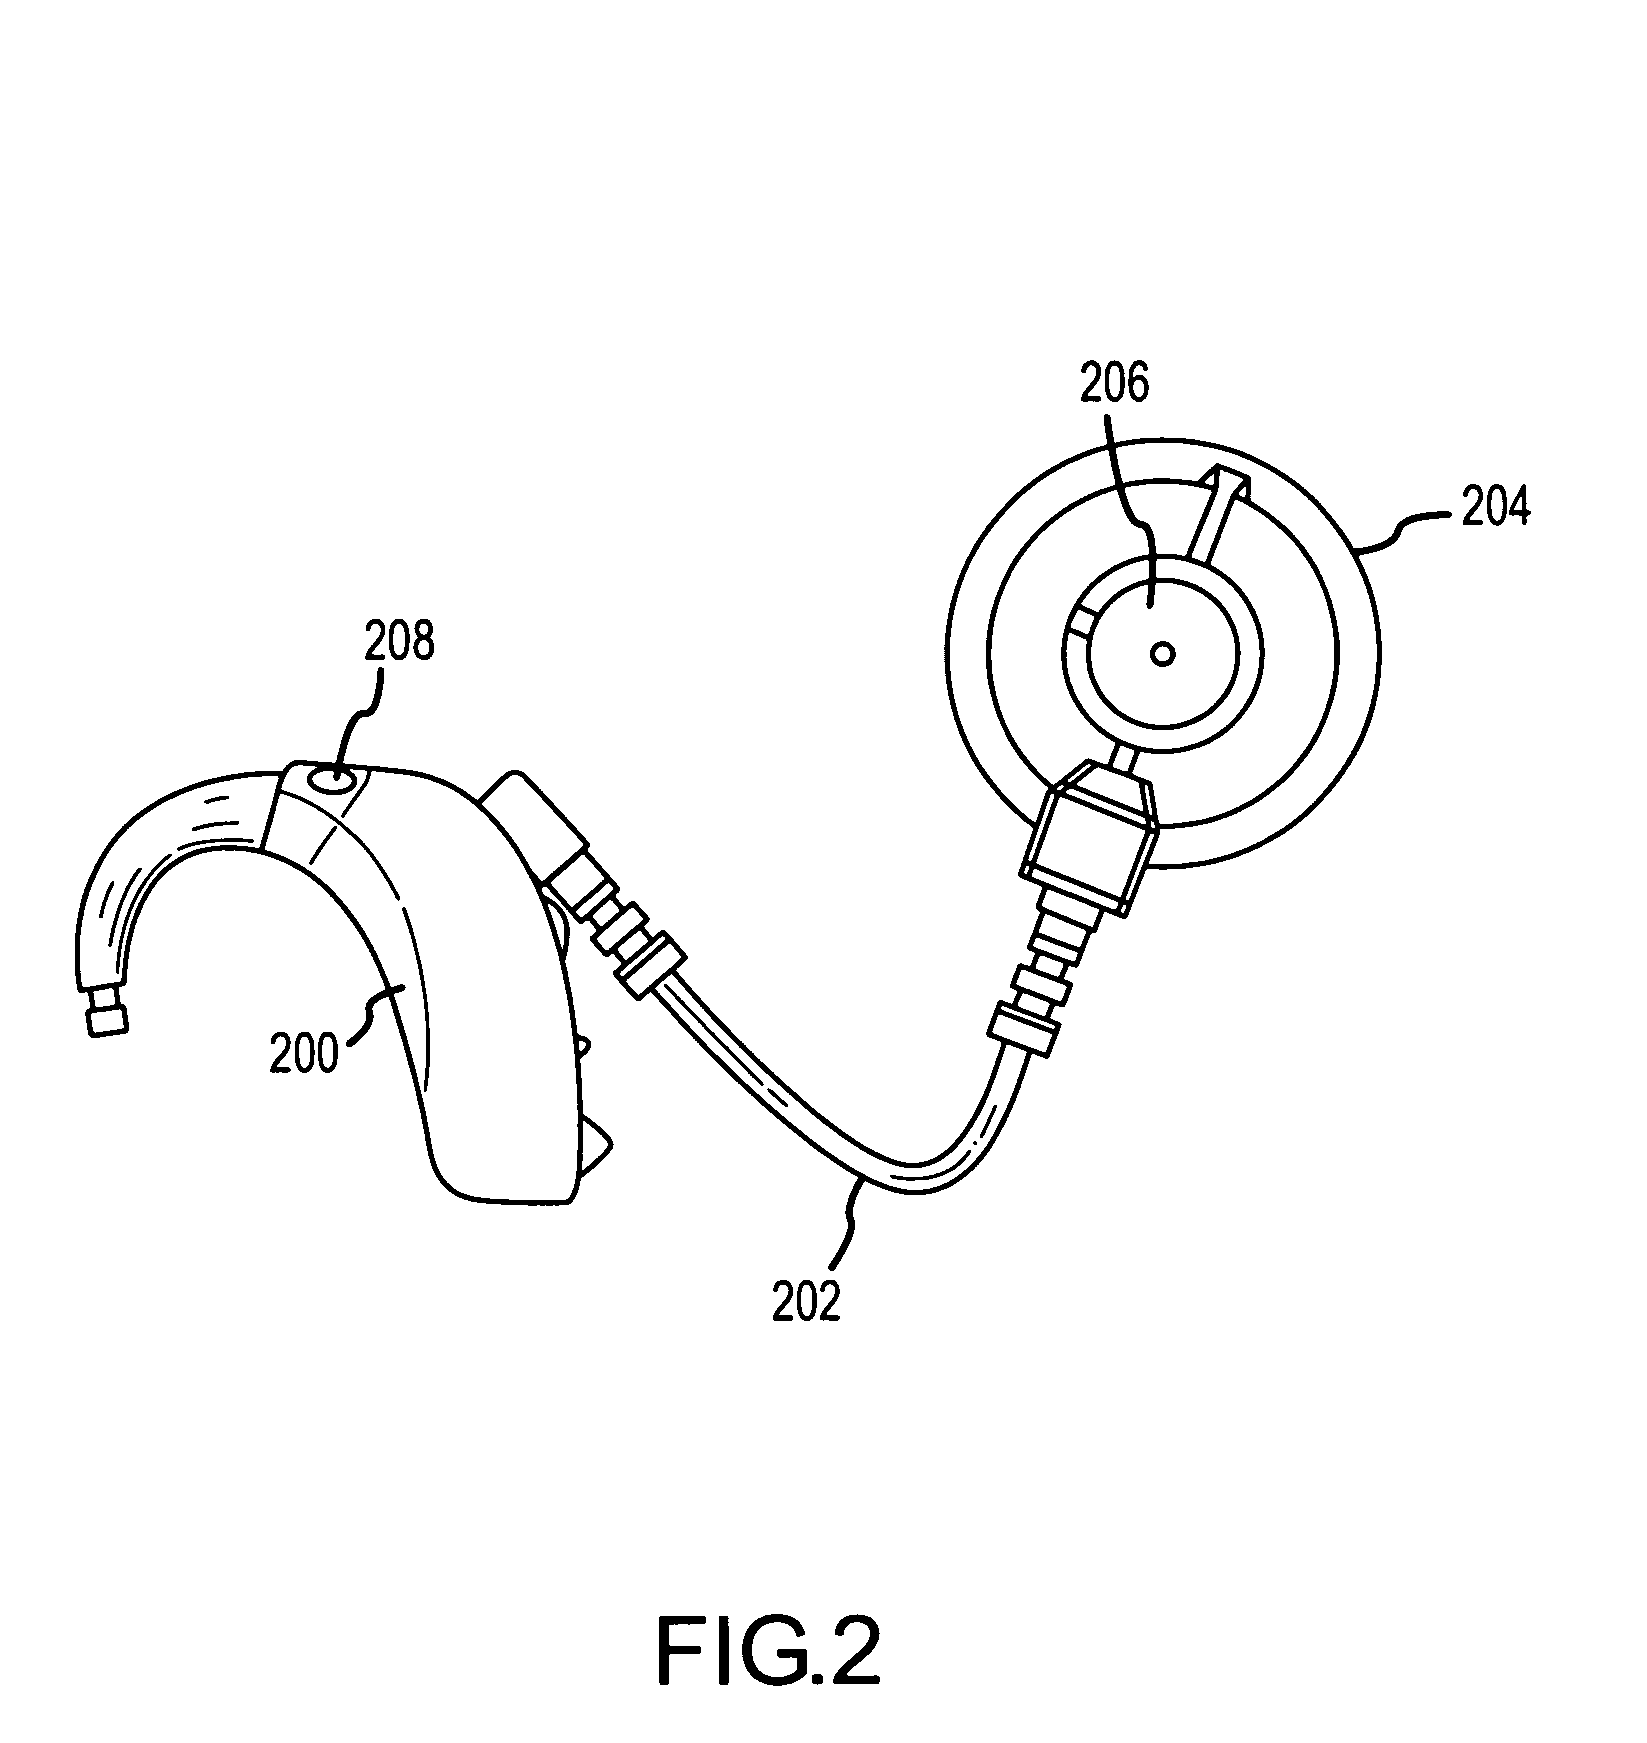 Method for obtaining diagnostic information relating to a patient having an implanted transducer